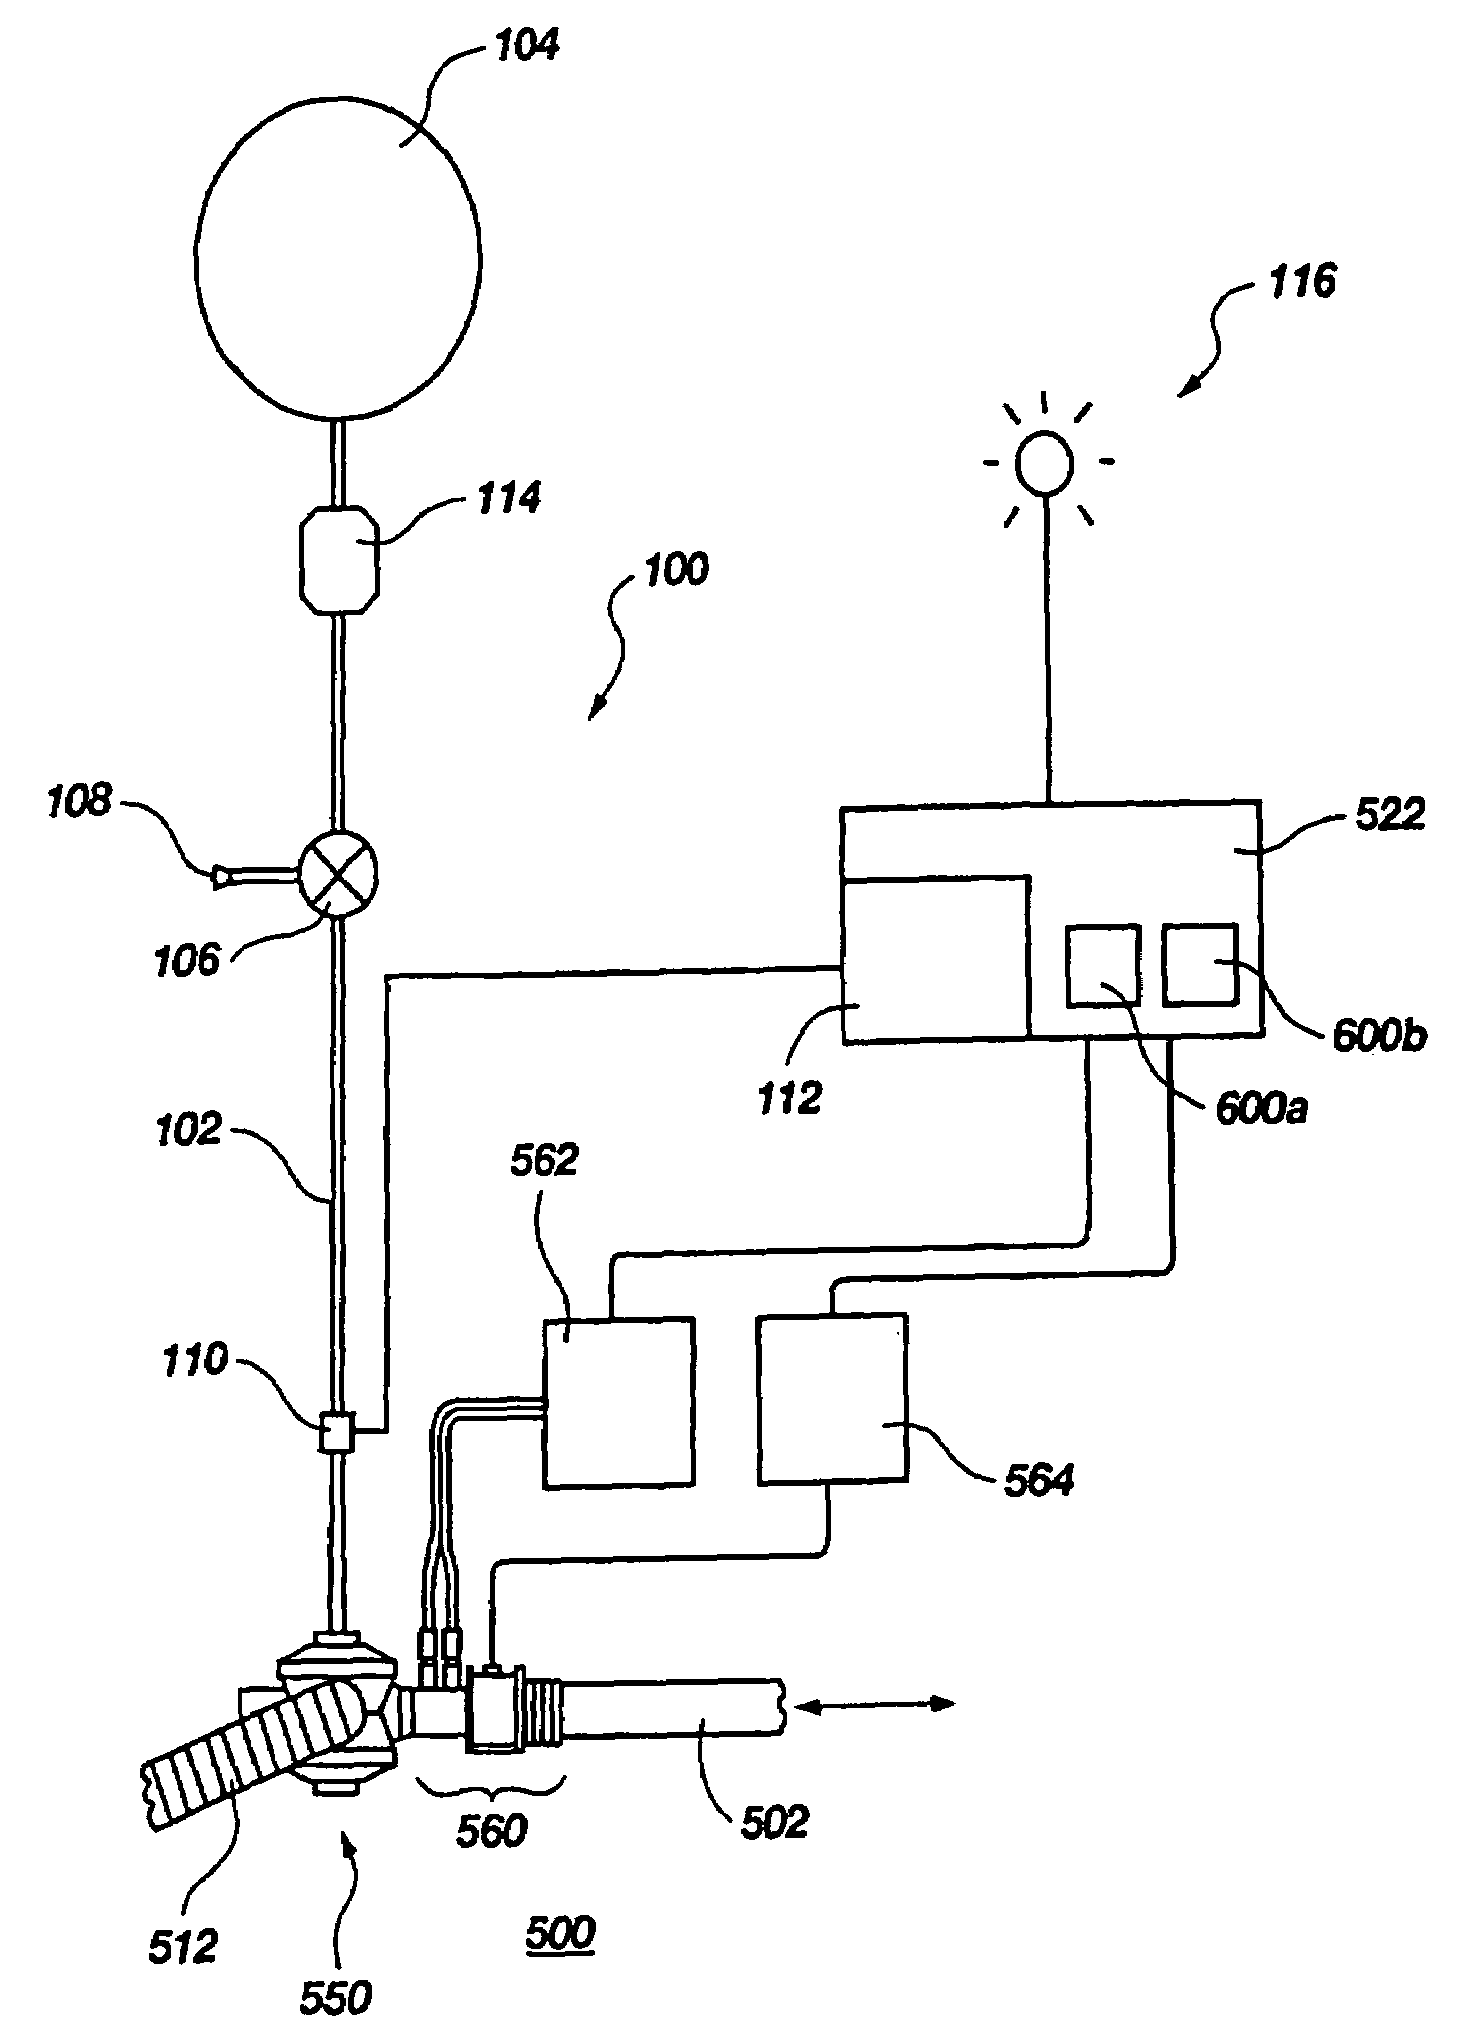 Reliability-enhanced apparatus operation for re-breathing and methods of effecting same